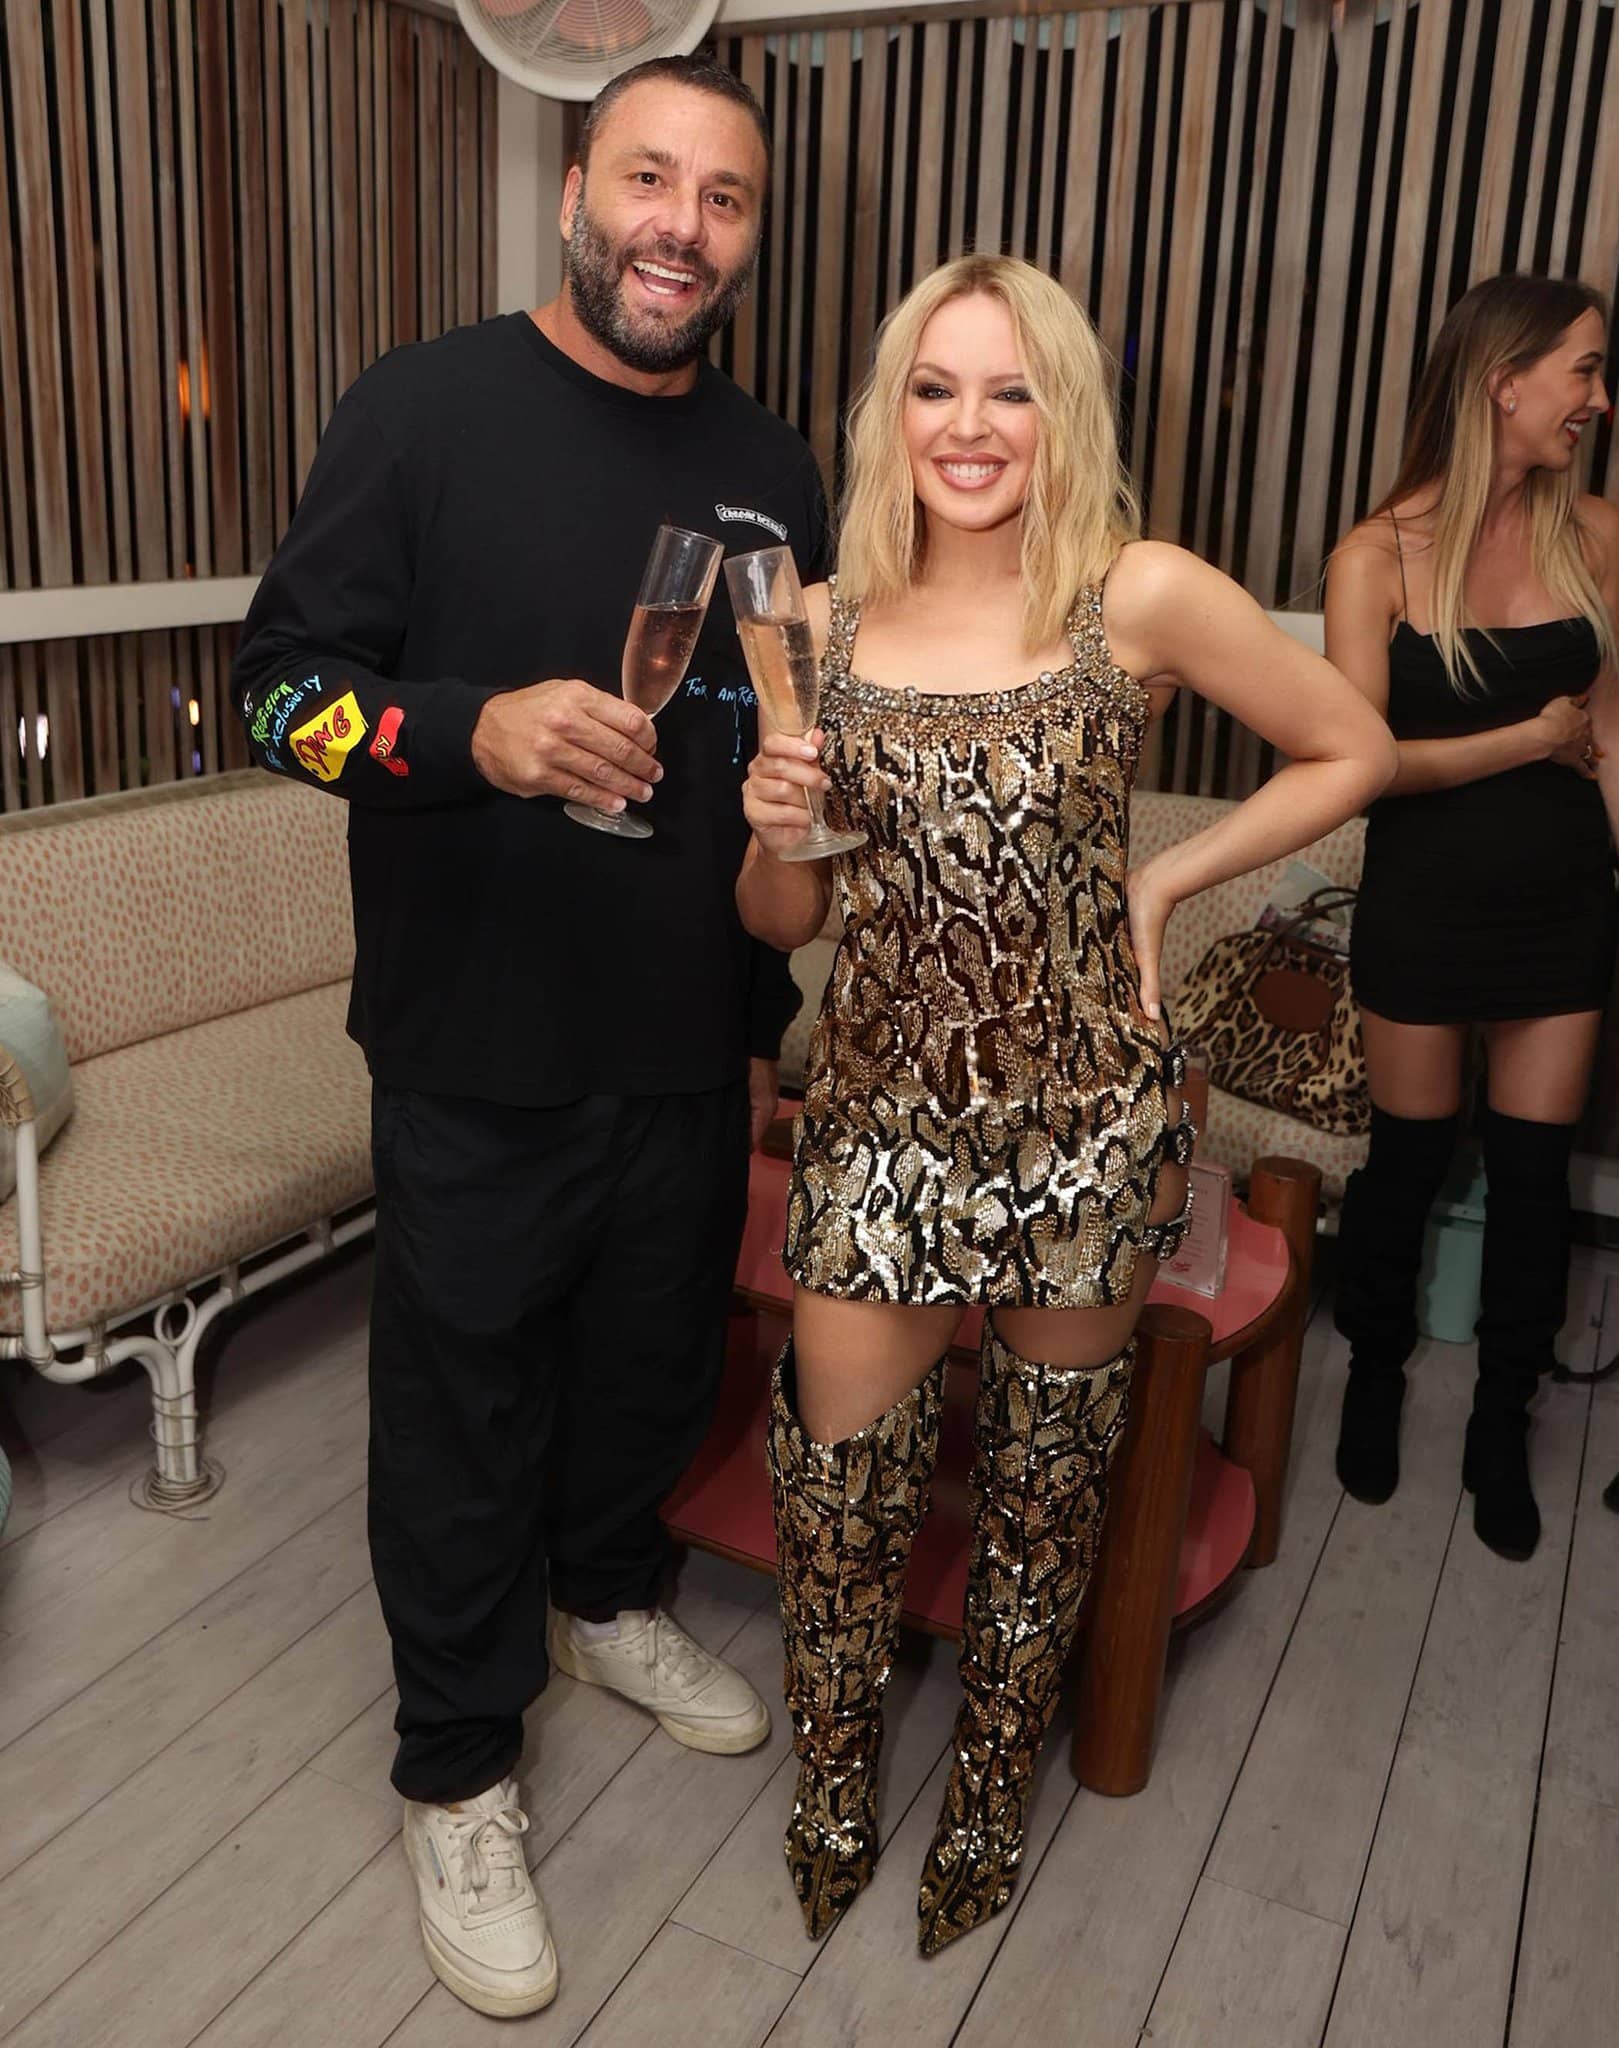 Joined by David Grutman, Kylie Minogue celebrates the launch of her eponymous range of wines to the US market in a Fausto Puglisi for Roberto Cavalli Fall 2022 snake outfit